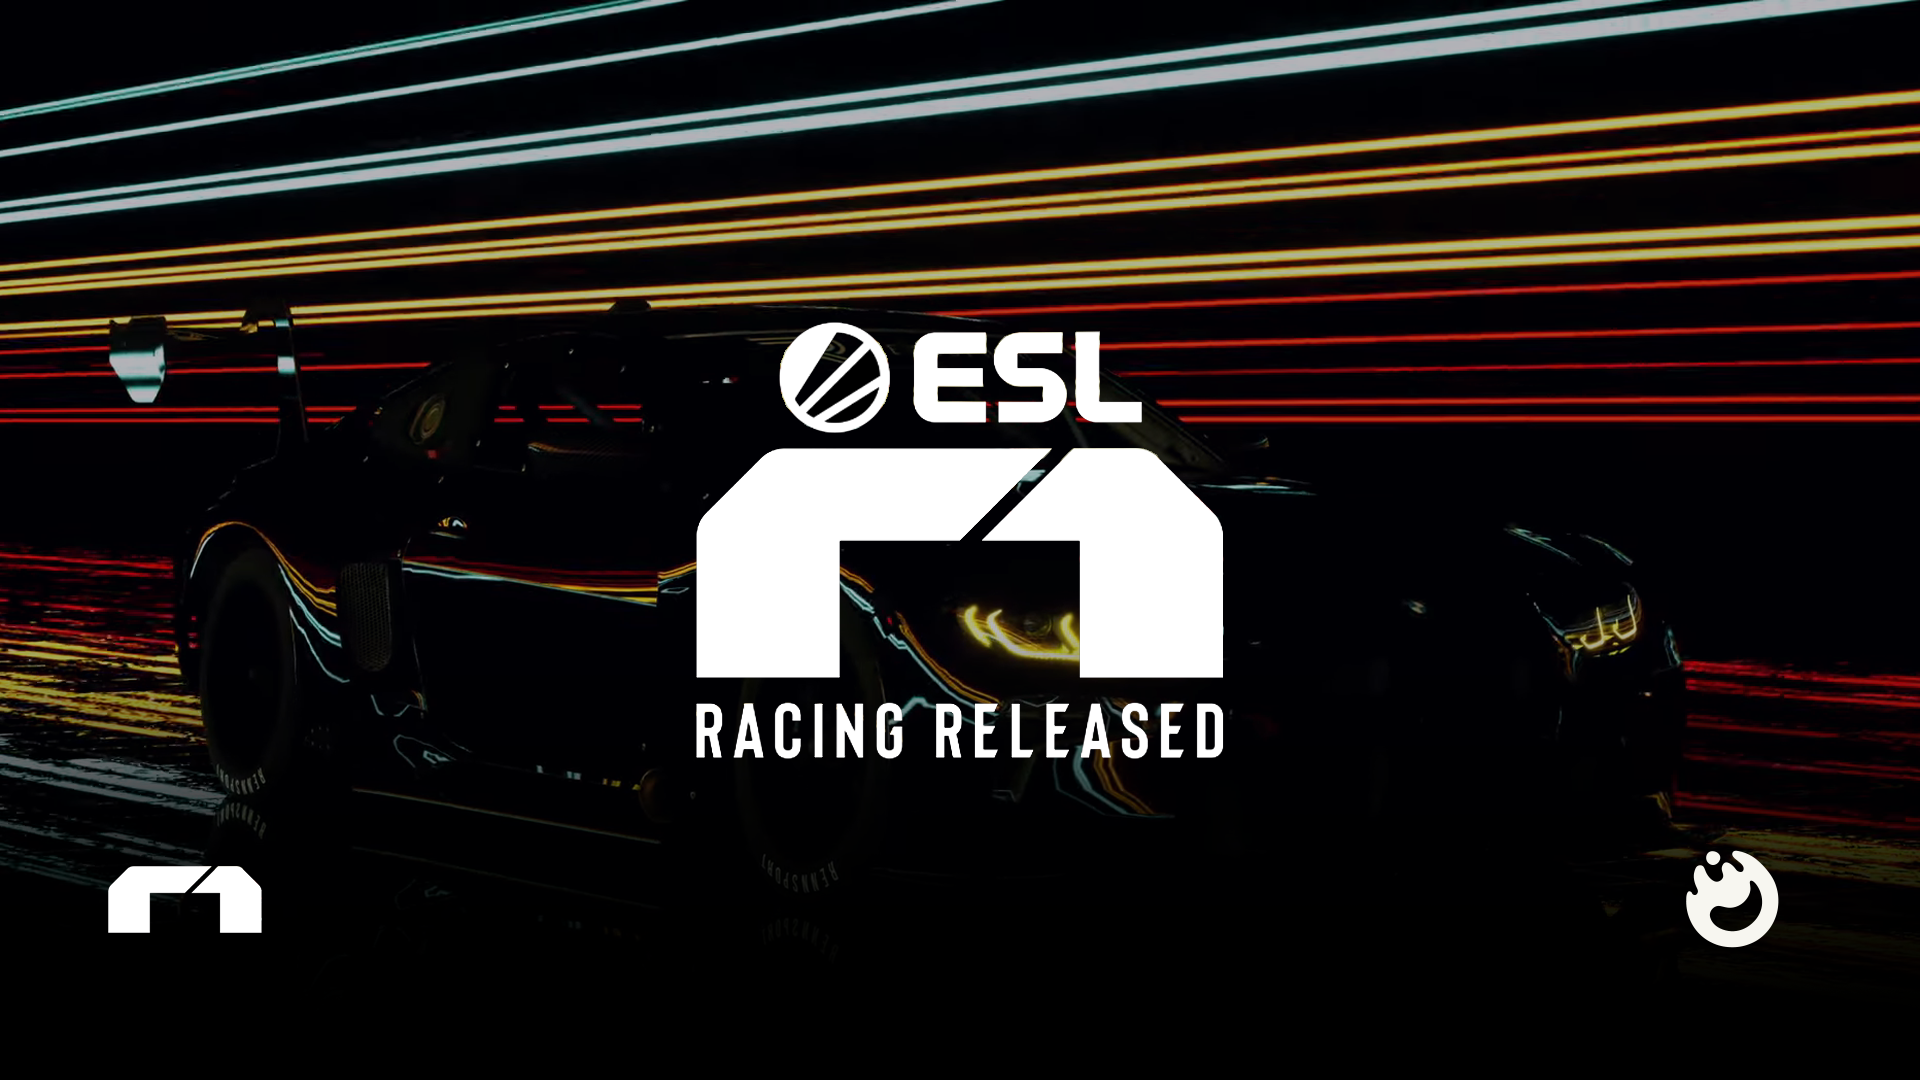 Sim racing stalwarts, esports elite to face off in new ESL R1 series